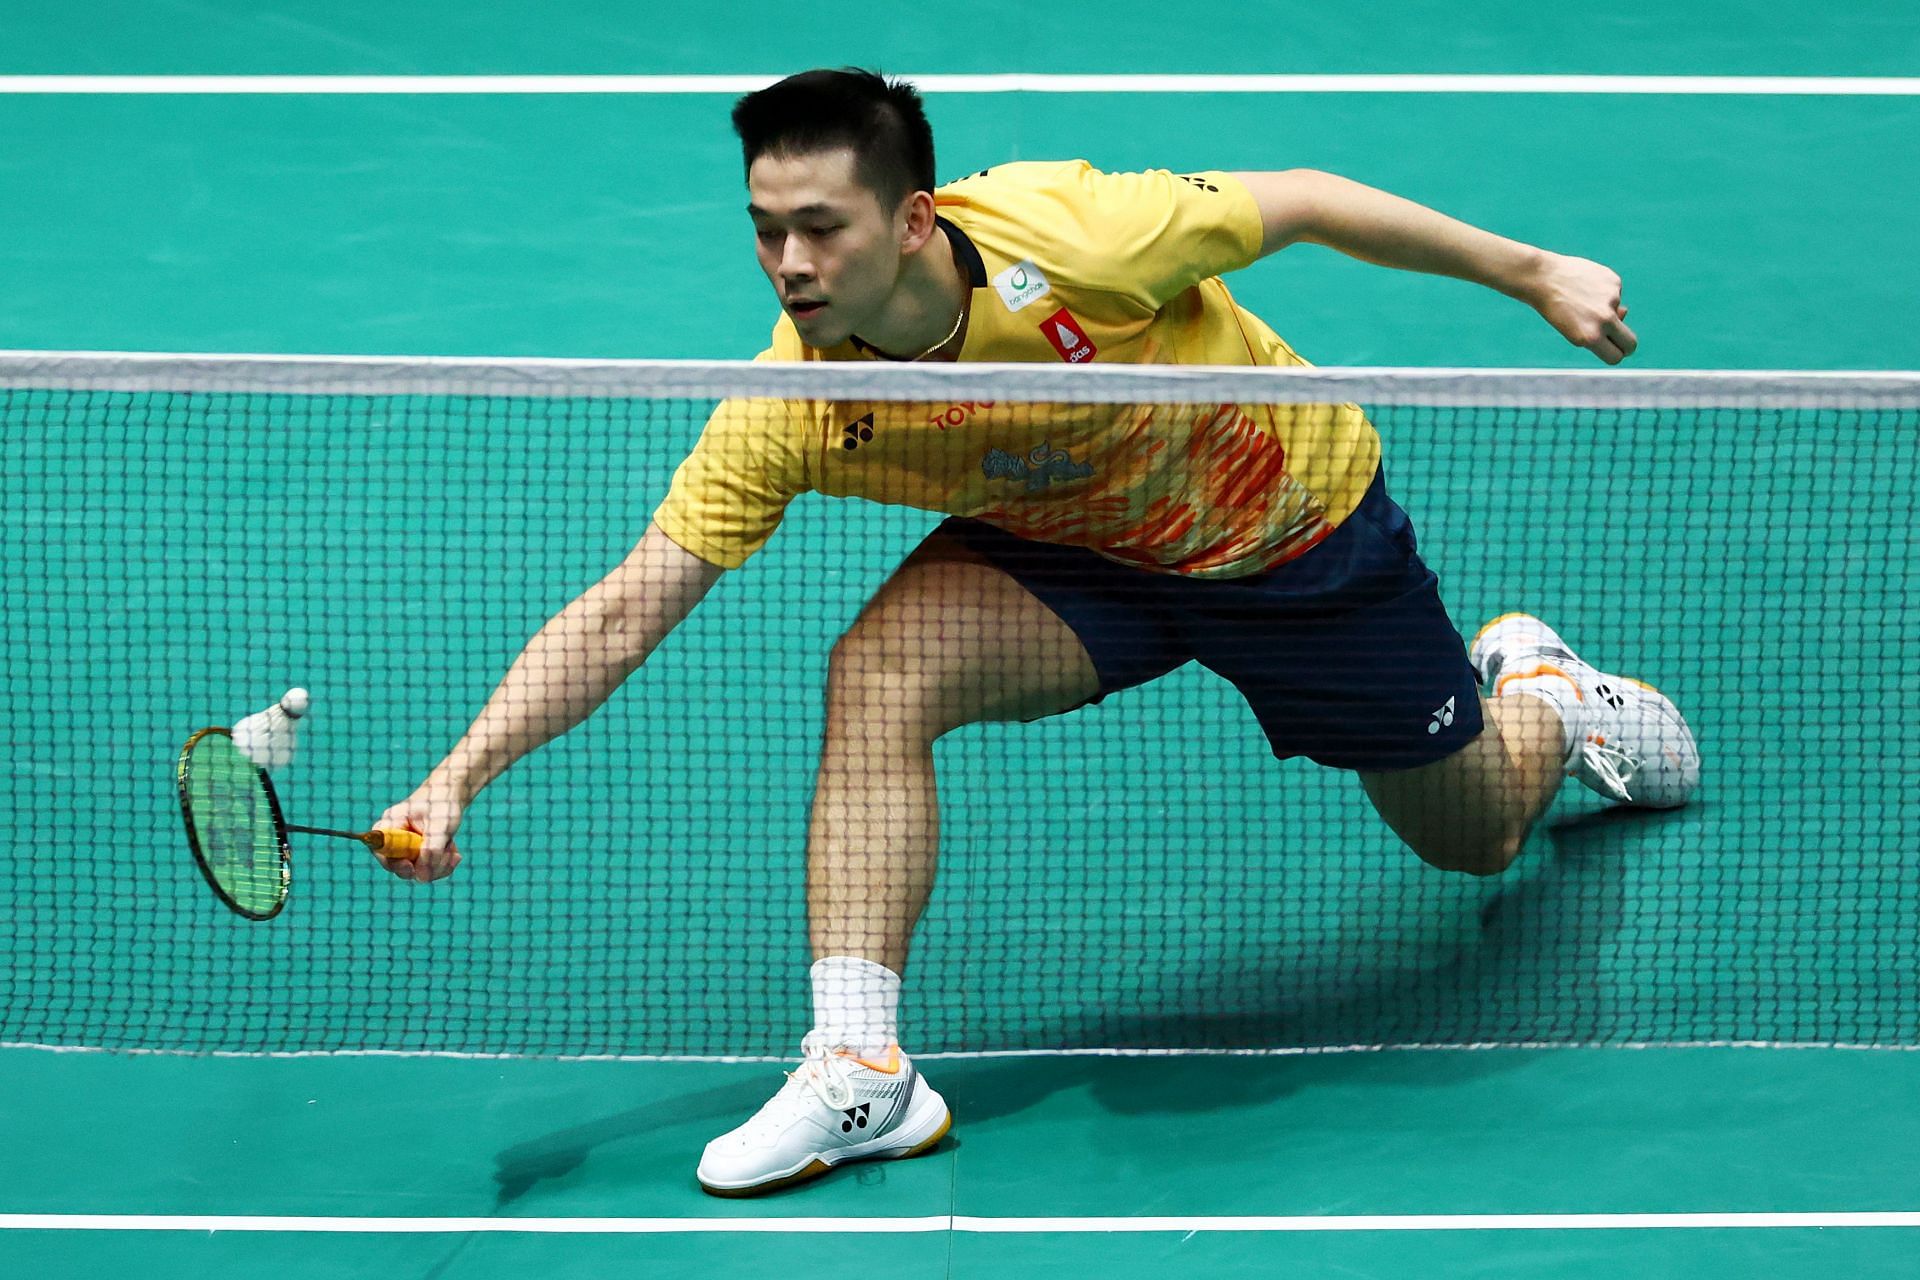 BWF World Championships 2023 HS Prannoy vs Kunlavut Vitidsarn, head-to-head, prediction, where to watch and live streaming details